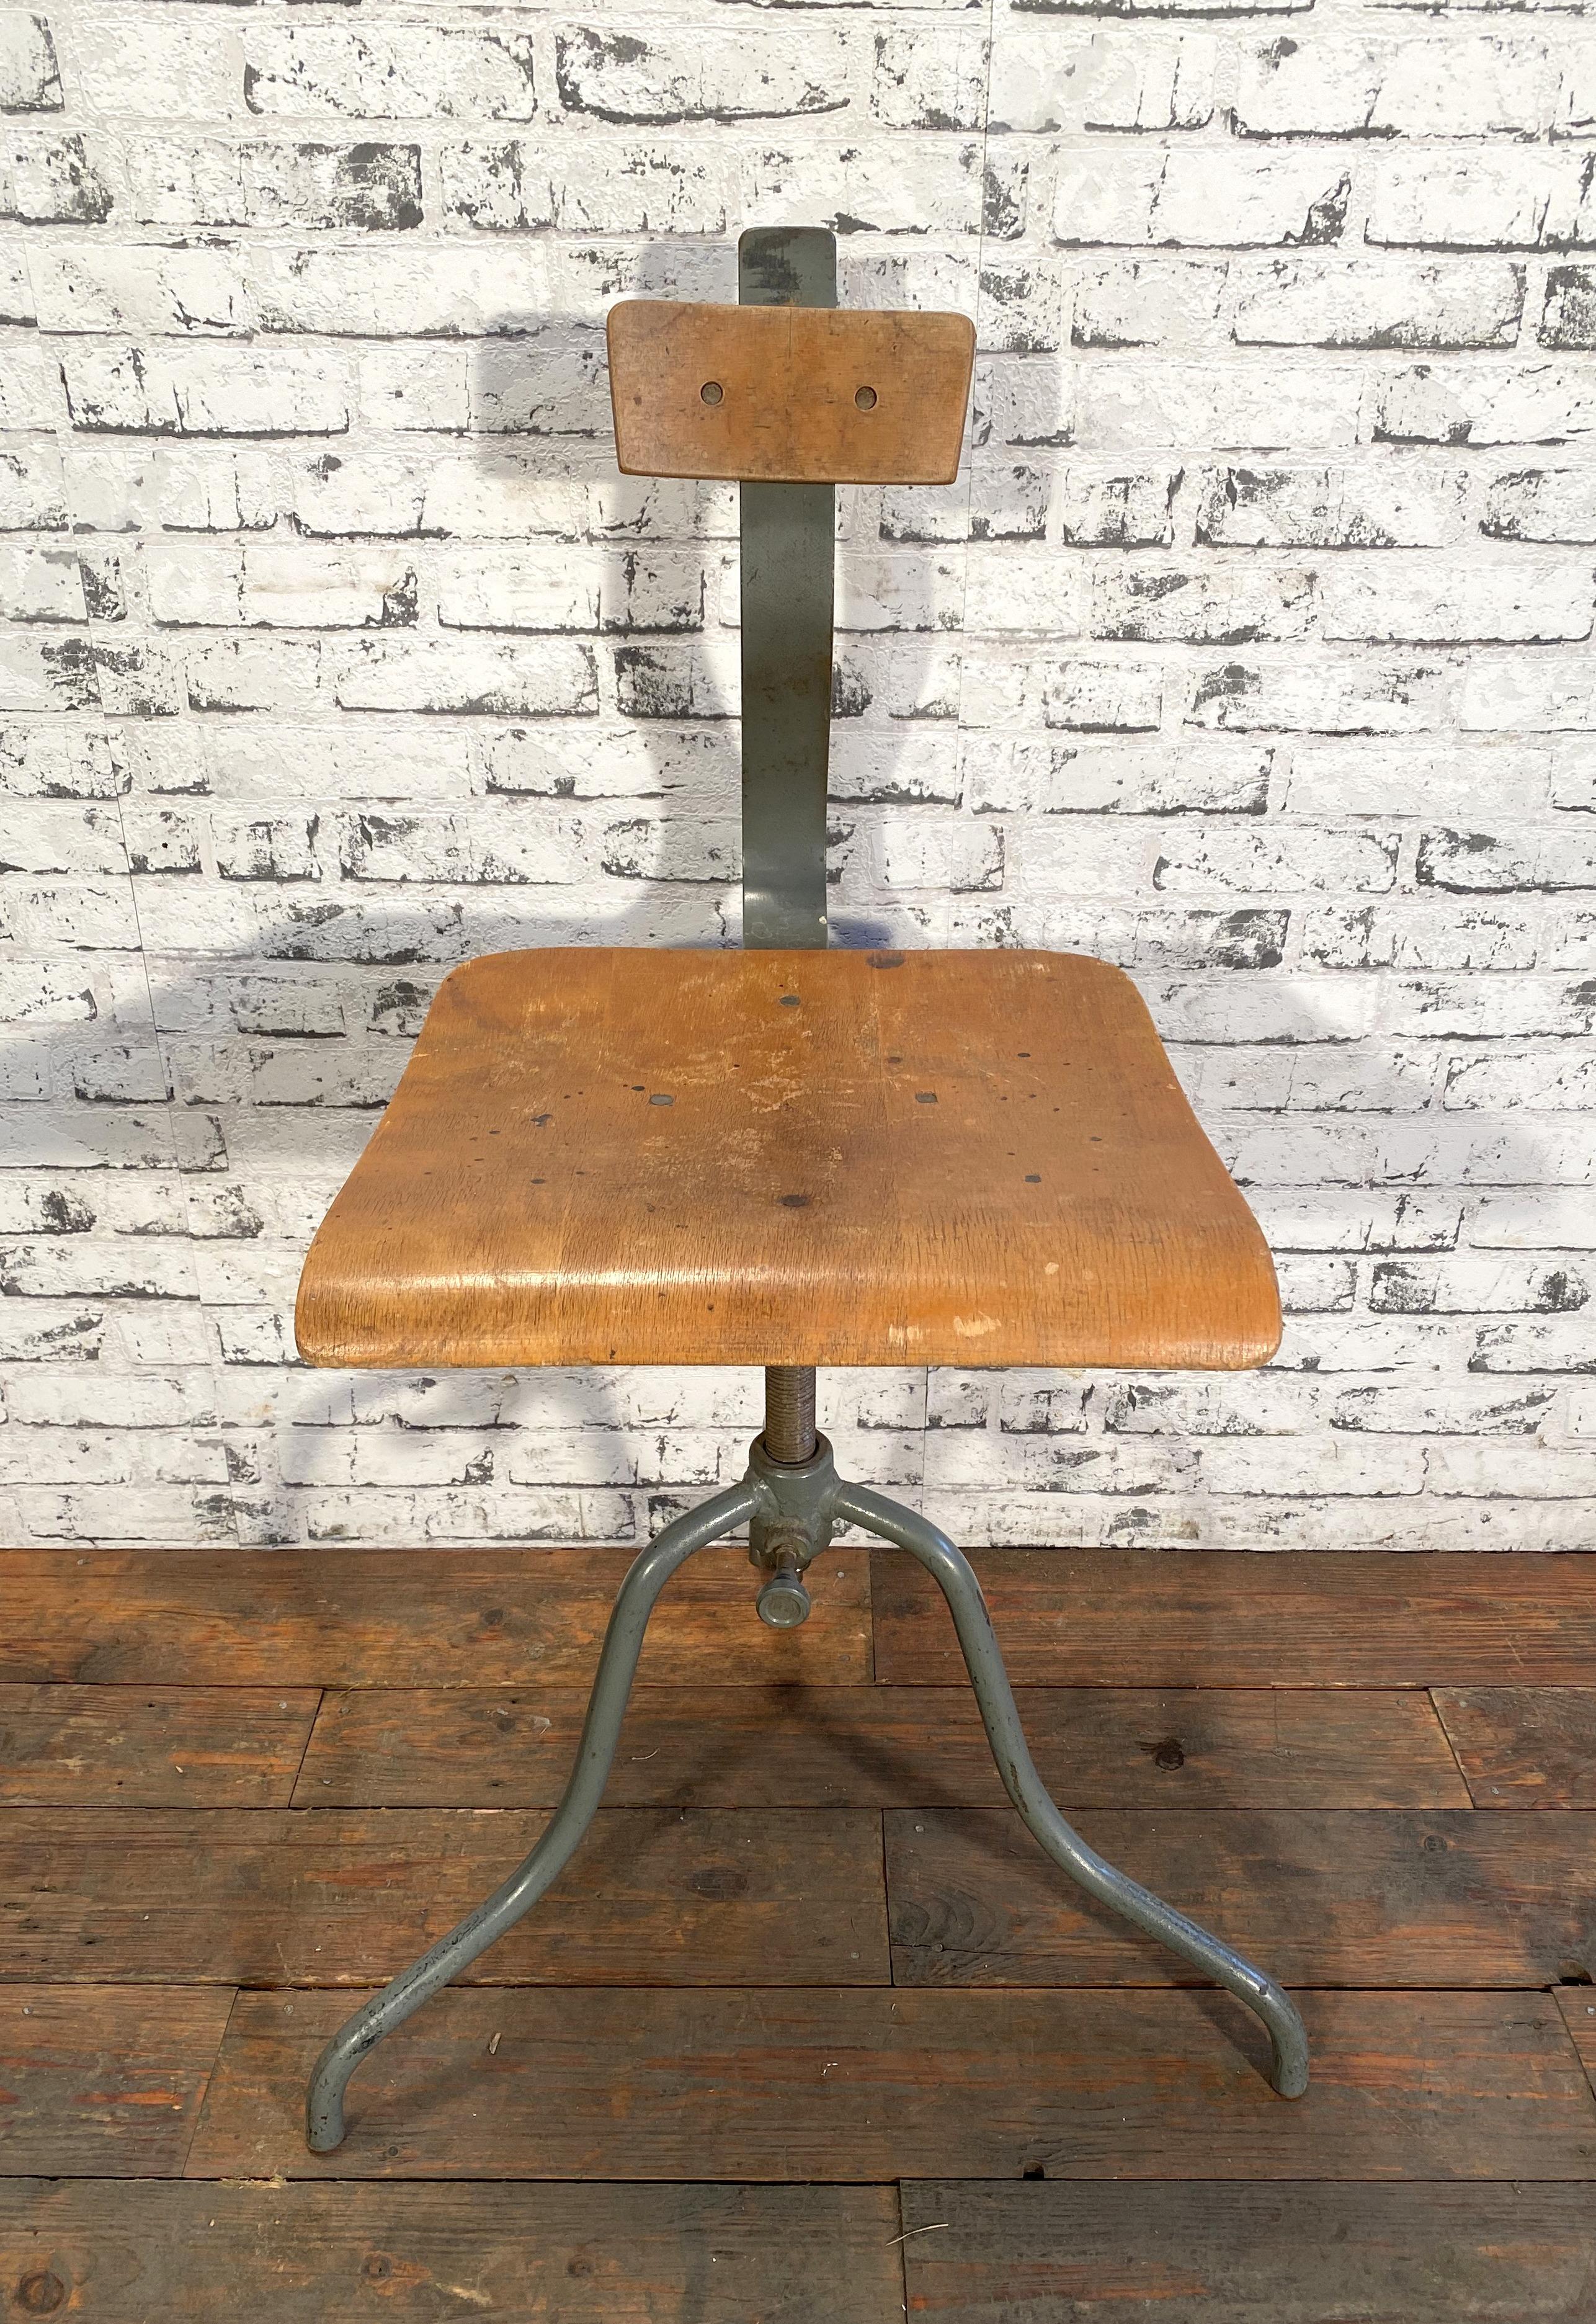 This industrial height adjustable swivel chair was made in former Czechoslovakia during the 1960s. The construction is made of gray painted iron and has a plywood seat and backrest. The chair is in very good vintage condition. Weight of the chair is